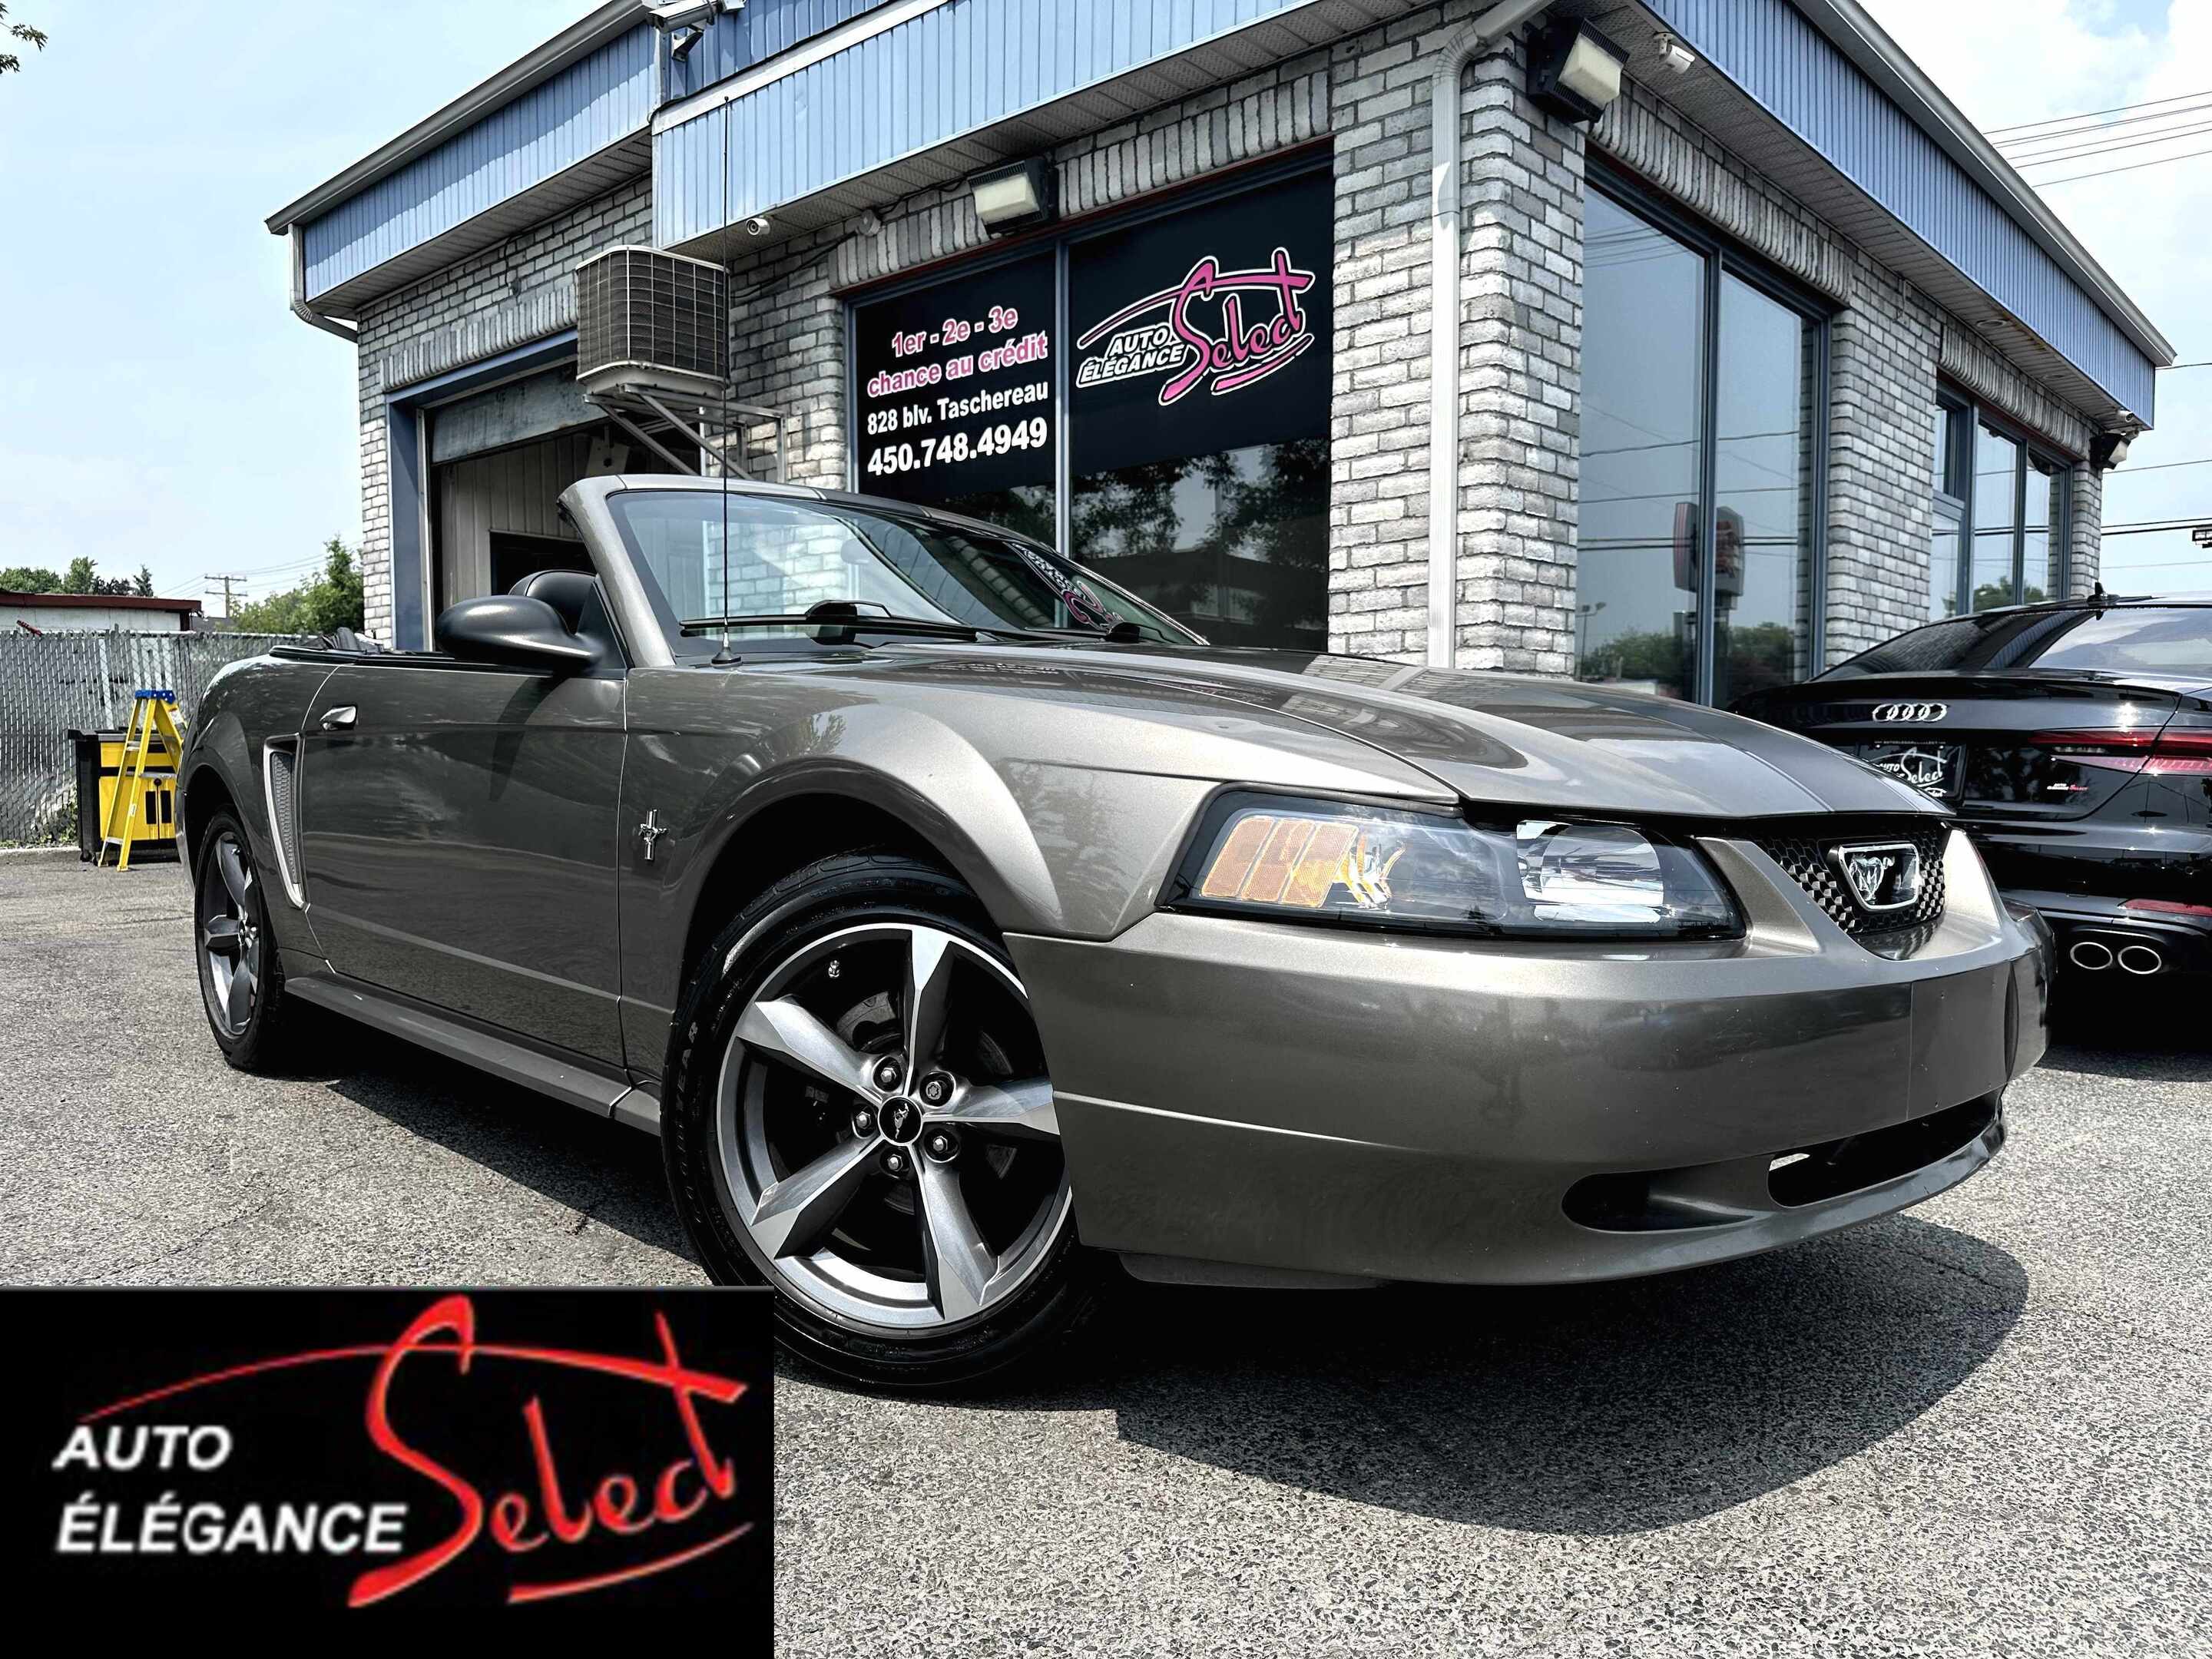 2002 Ford Mustang 2dr Convertible V6 Cuir MAN **5 SPEED**